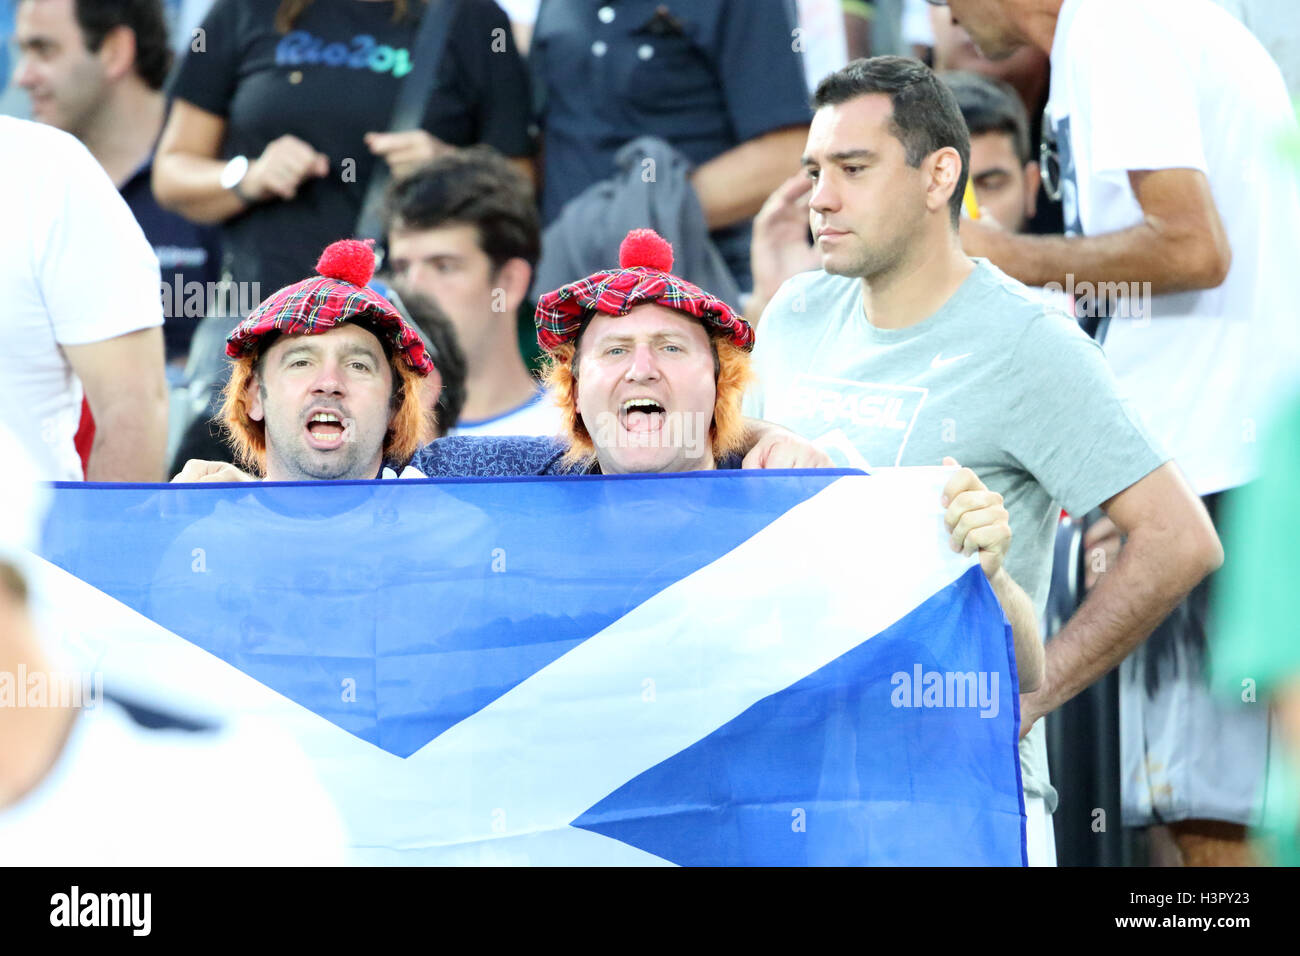 Scottish fans holding a altar flag and wearing 'See you Jimmy' bunnets and wigs at the Andy Murray Tennis final at the Rio Olympics Stock Photo